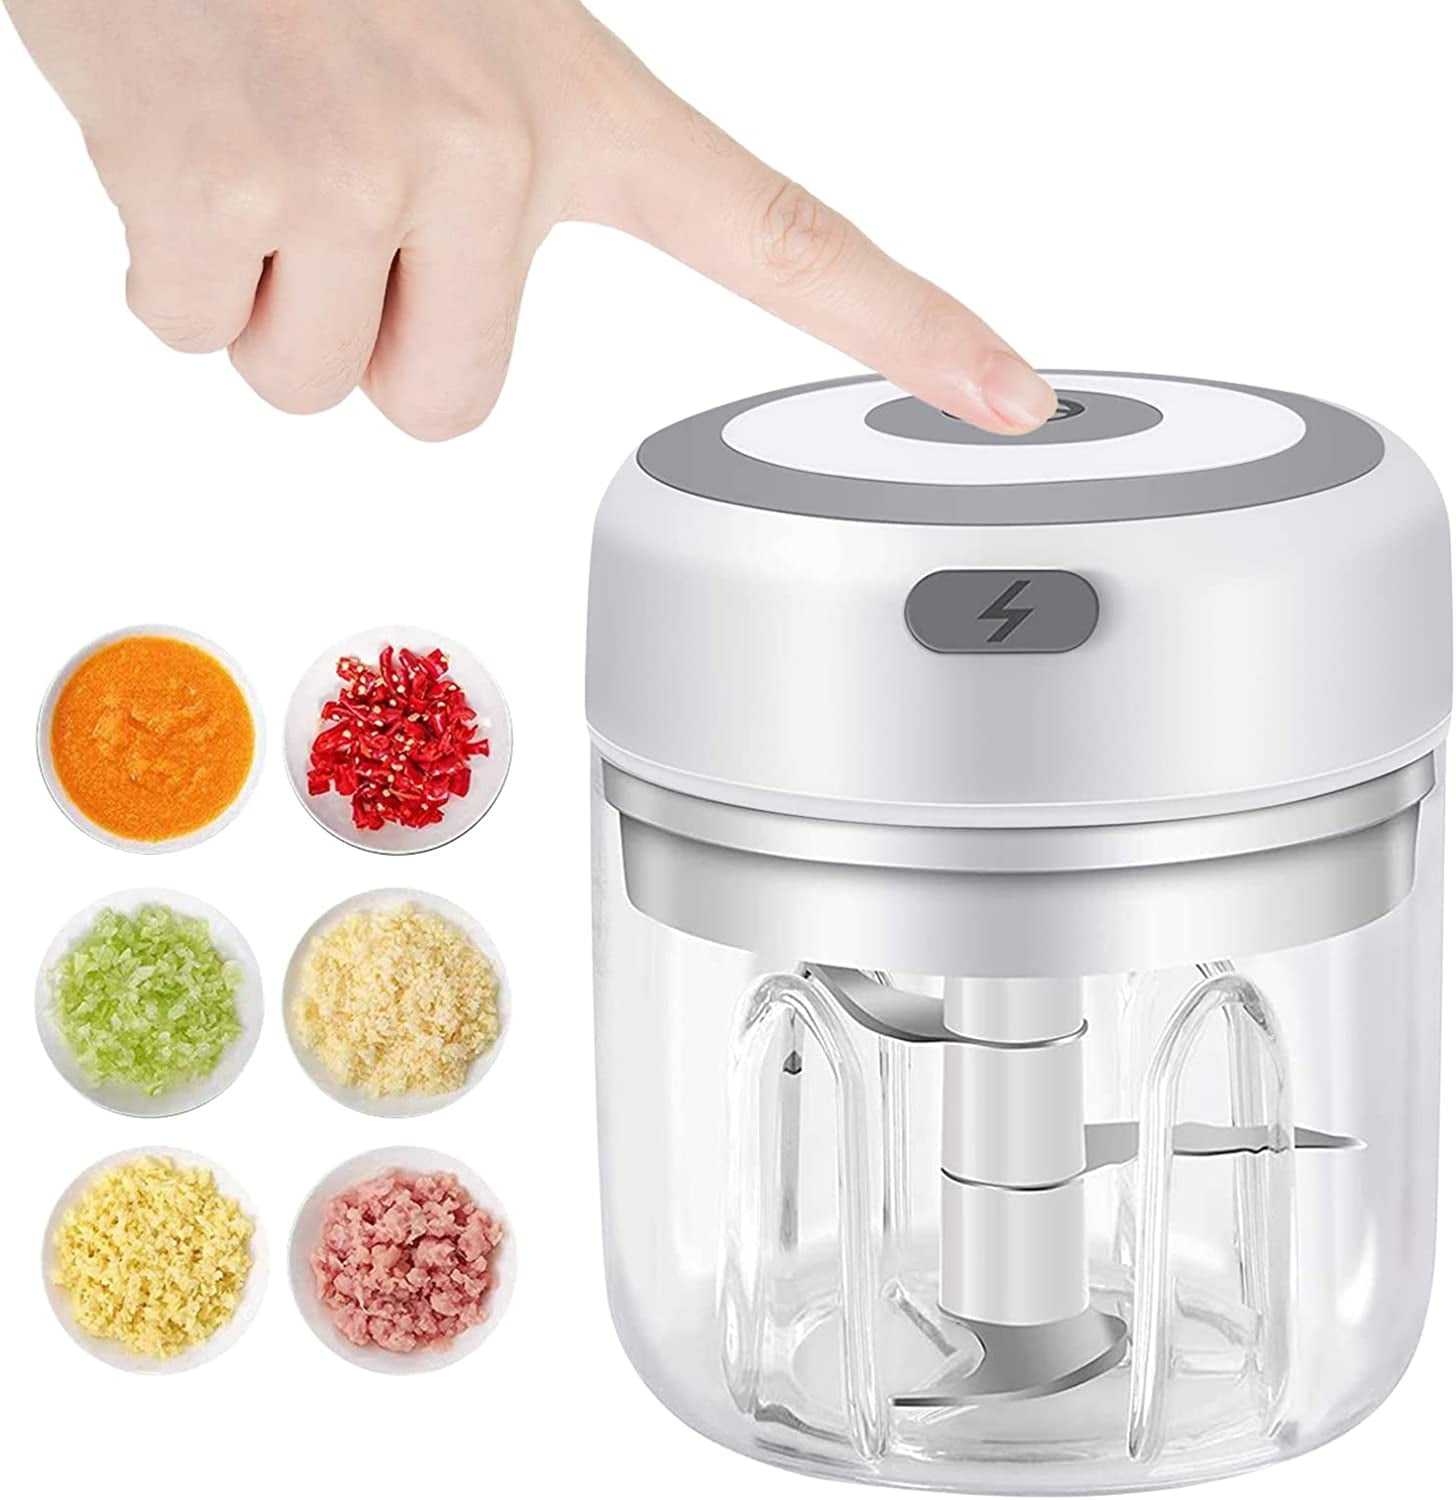 KitchekShop Rechargeable Portable And Cordless Mini Food Processor 250ml  With Stainless Steel Blade, Electric Garlic Chopper Vegetable Chopper  Blender For Nuts Chili Onion Minced Meat And Spices Bpa-free(green)